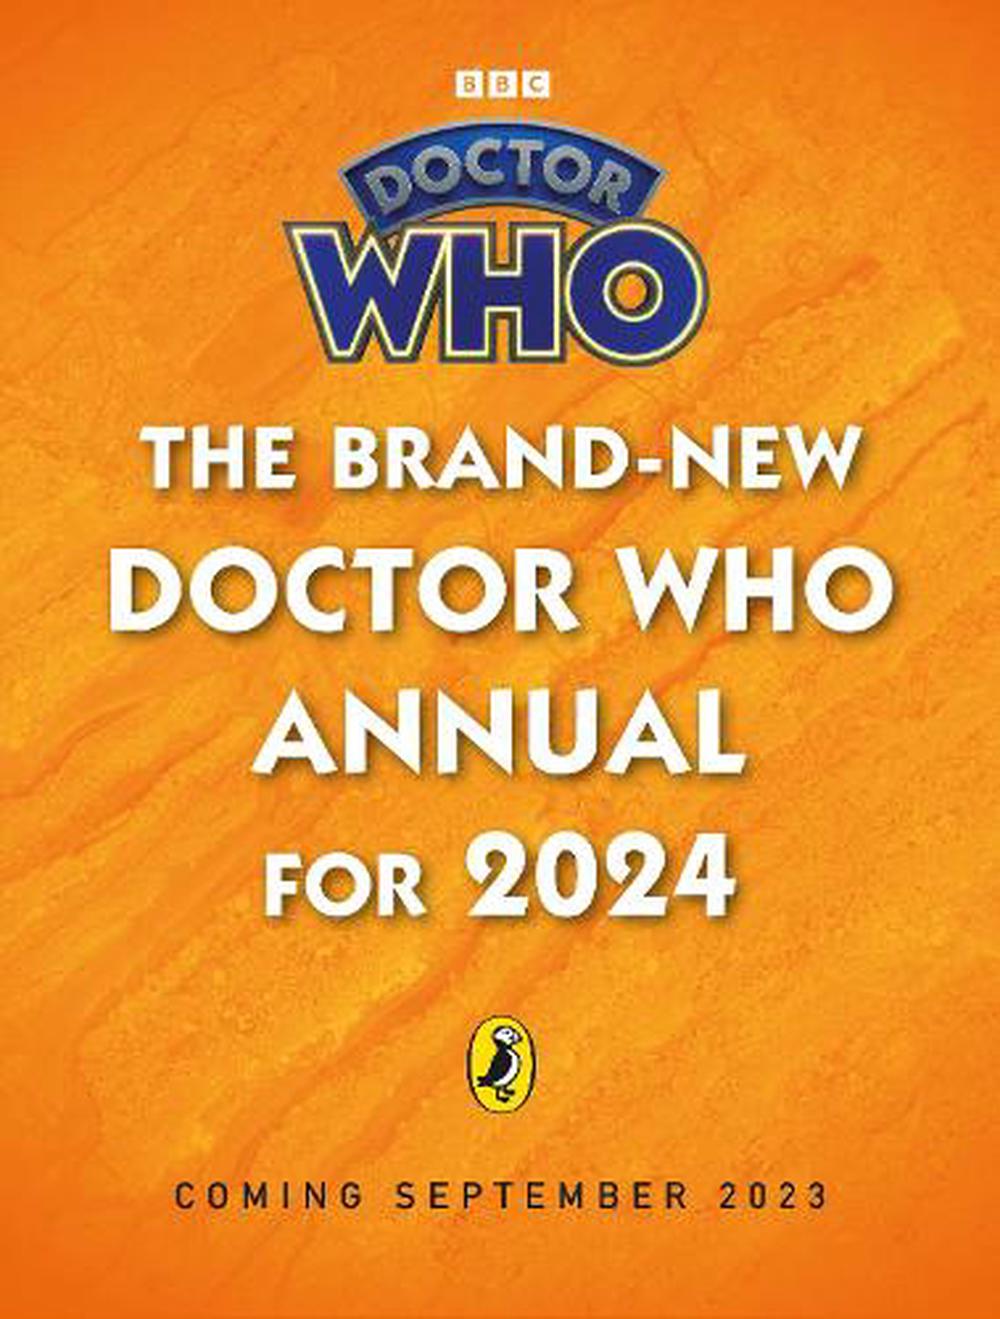 Doctor Who Annual 2024 by Paul Lang, Hardcover, 9781405956895 Buy